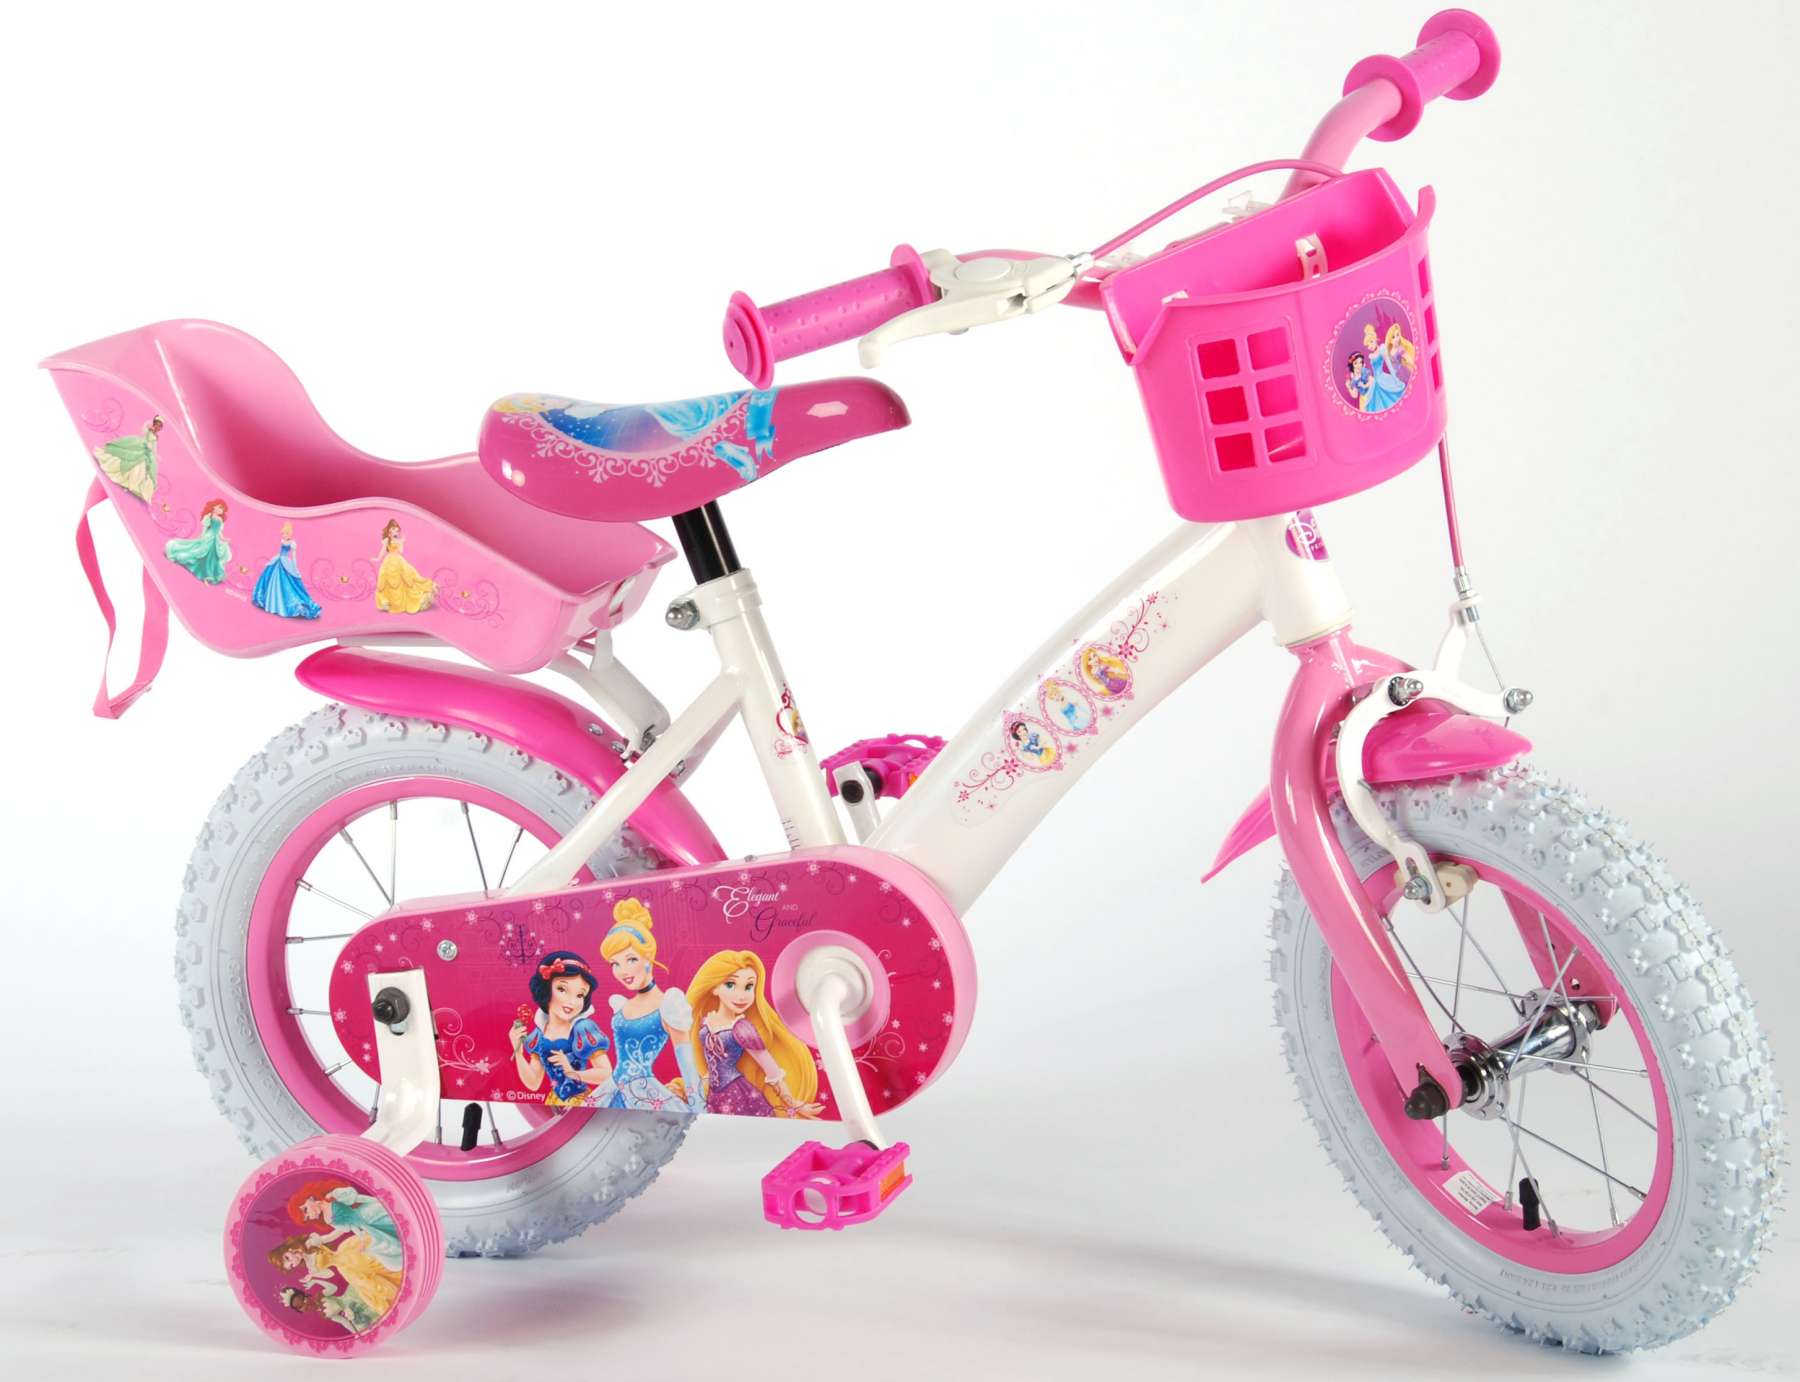 12 inch bike with doll seat